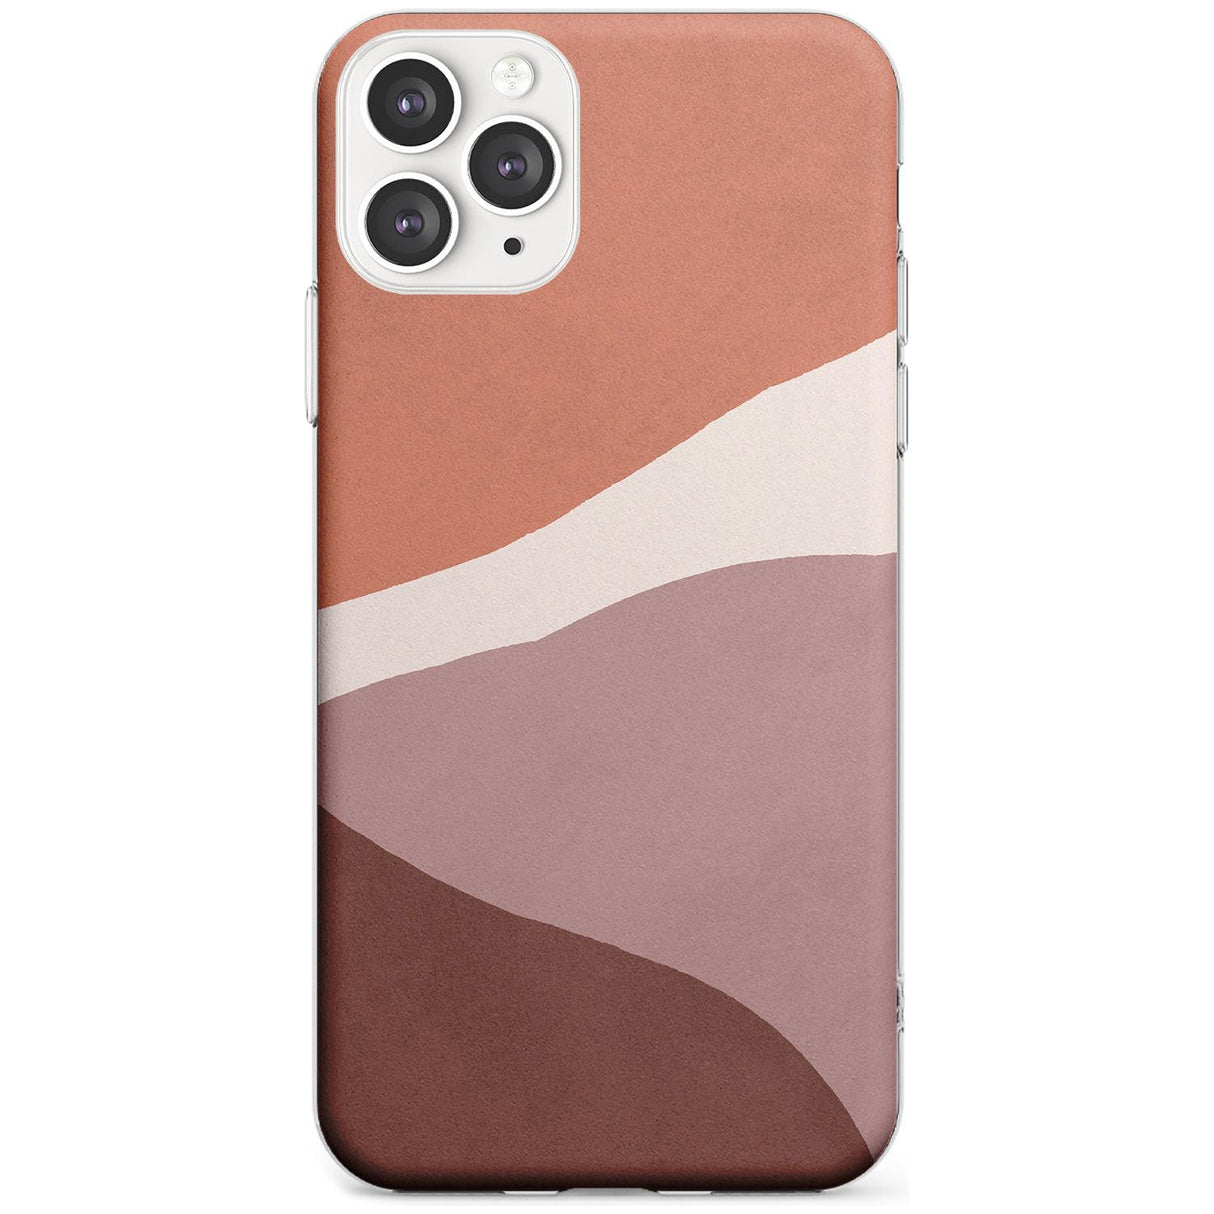 Lush Abstract Watercolour Design #2 Phone Case iPhone 11 Pro Max / Clear Case,iPhone 11 Pro / Clear Case,iPhone 12 Pro Max / Clear Case,iPhone 12 Pro / Clear Case Blanc Space